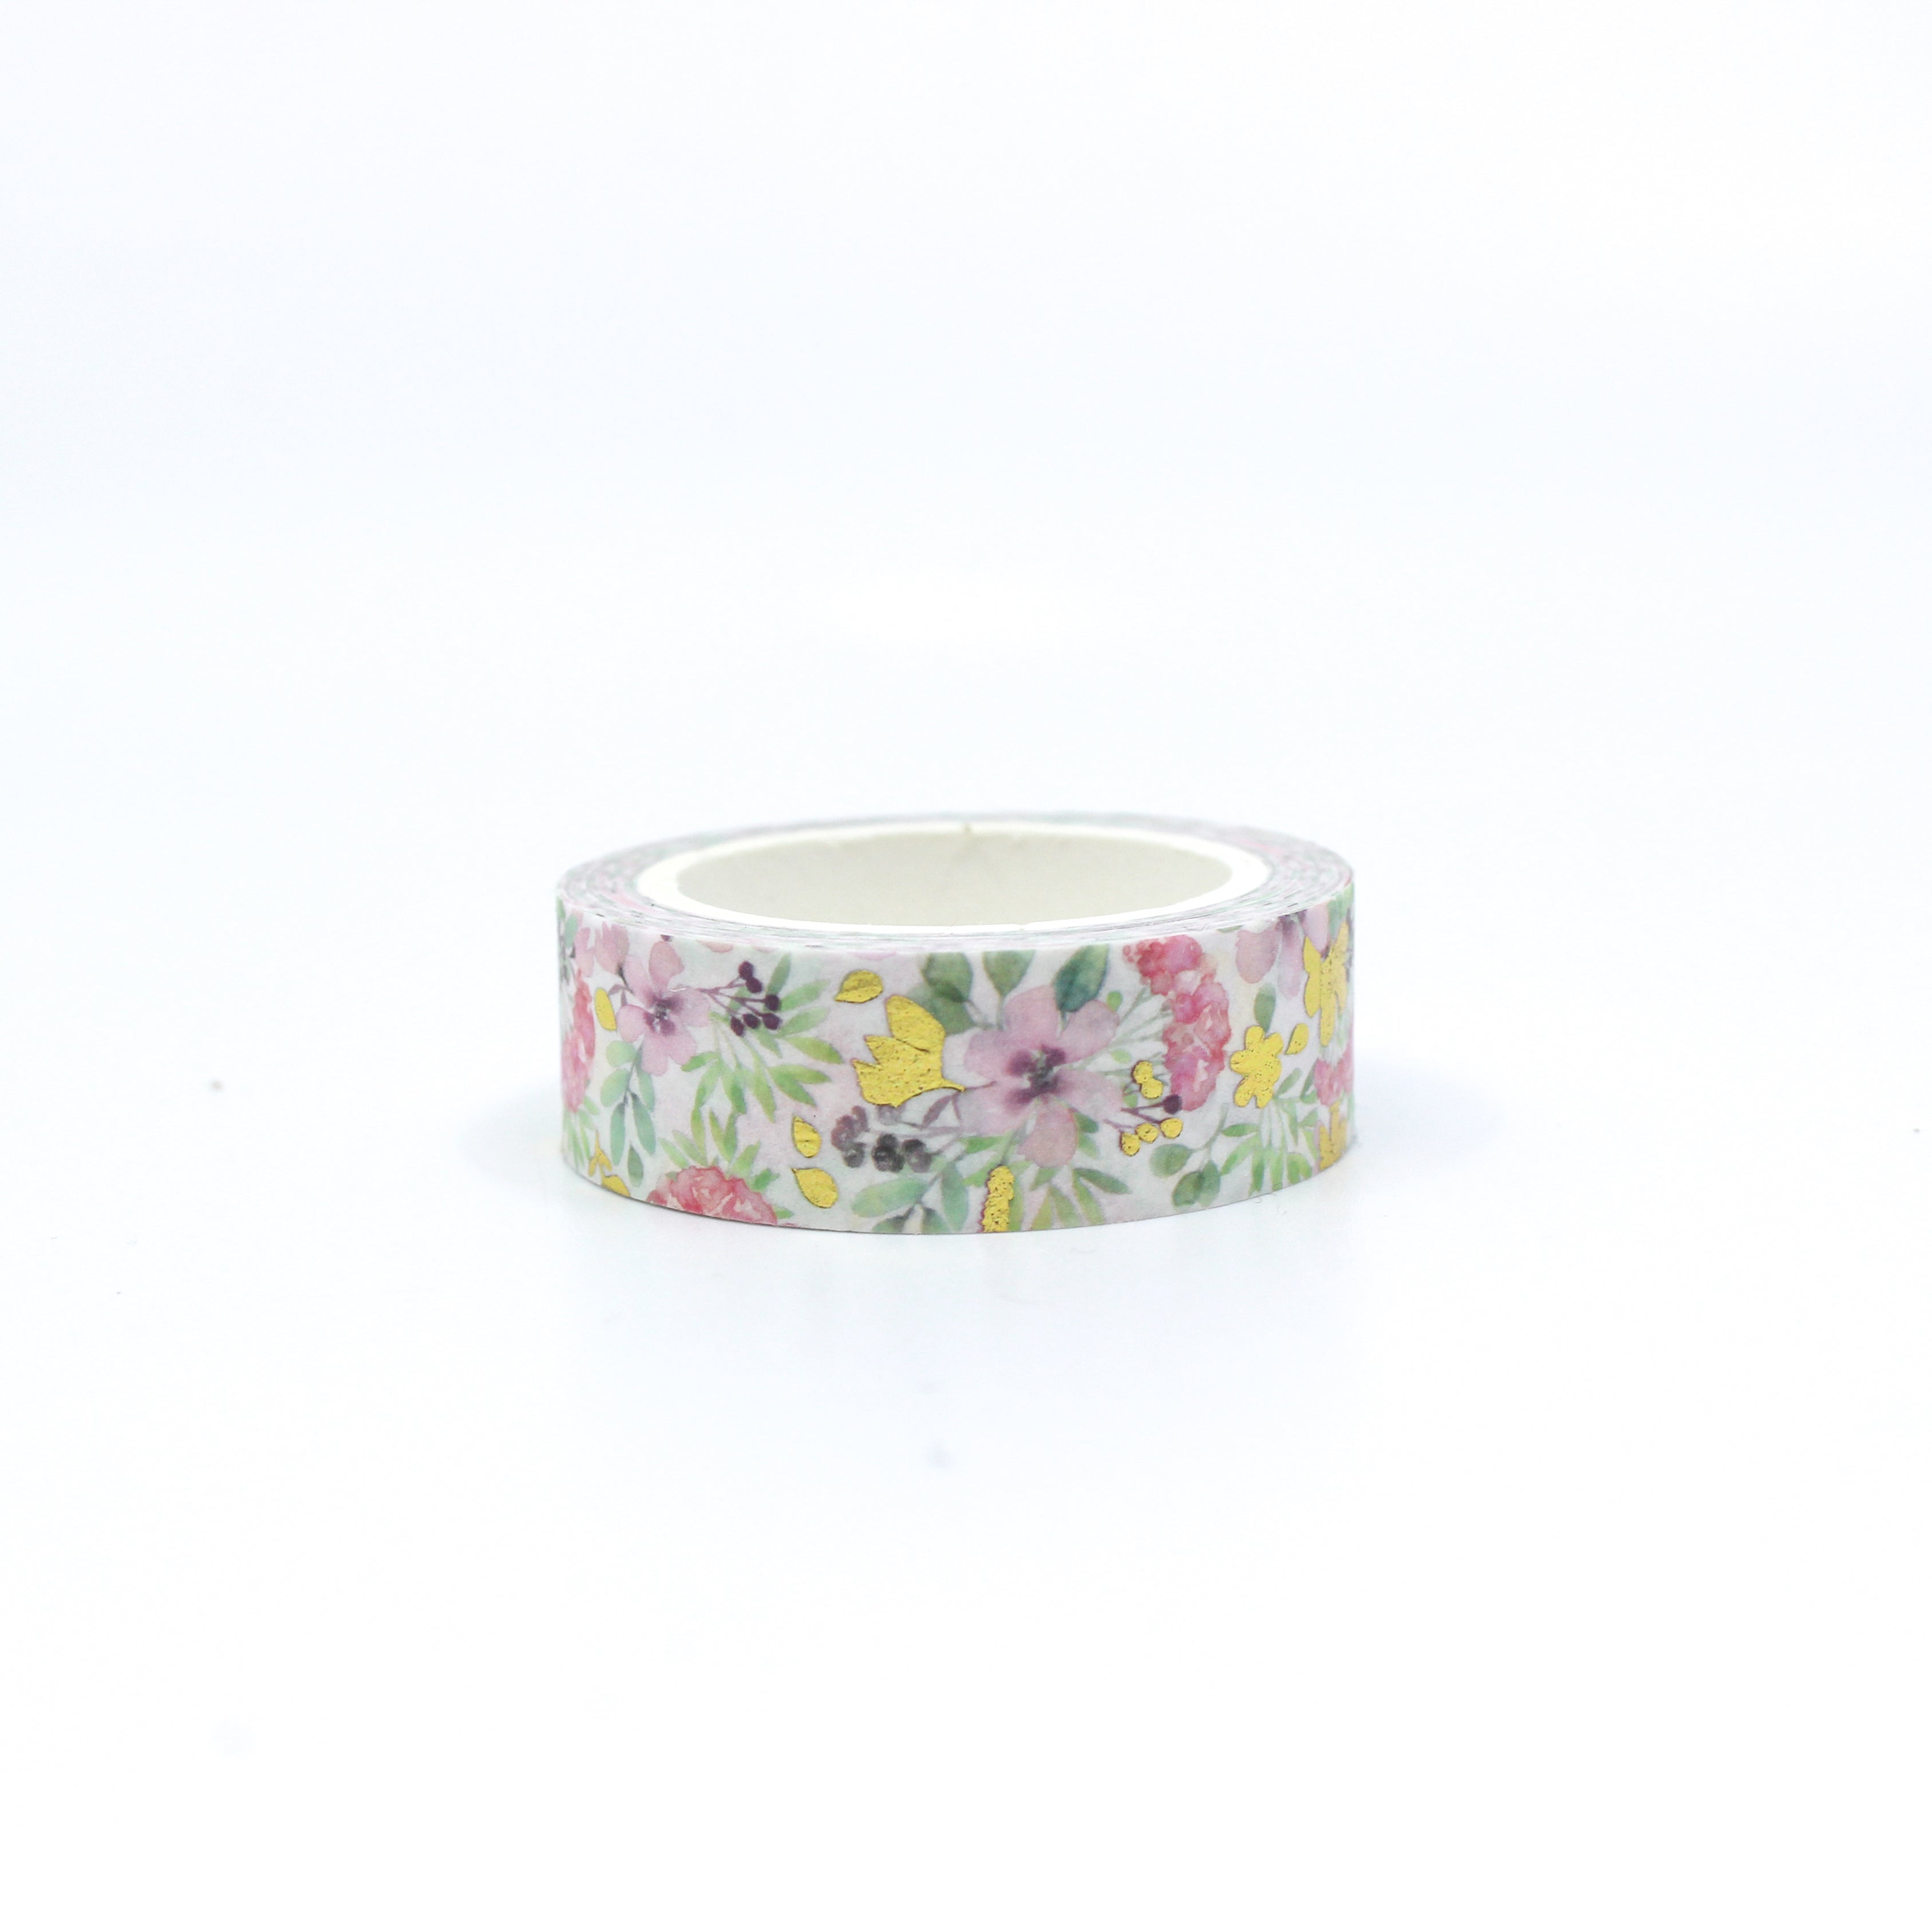 Infuse your creations with the beauty of a floral bouquet using our washi tape, adorned with a variety of flowers embellished with delicate gold foil accents, offering a charming and sophisticated touch. This tape is sold at BBB Supplies Craft Shop.